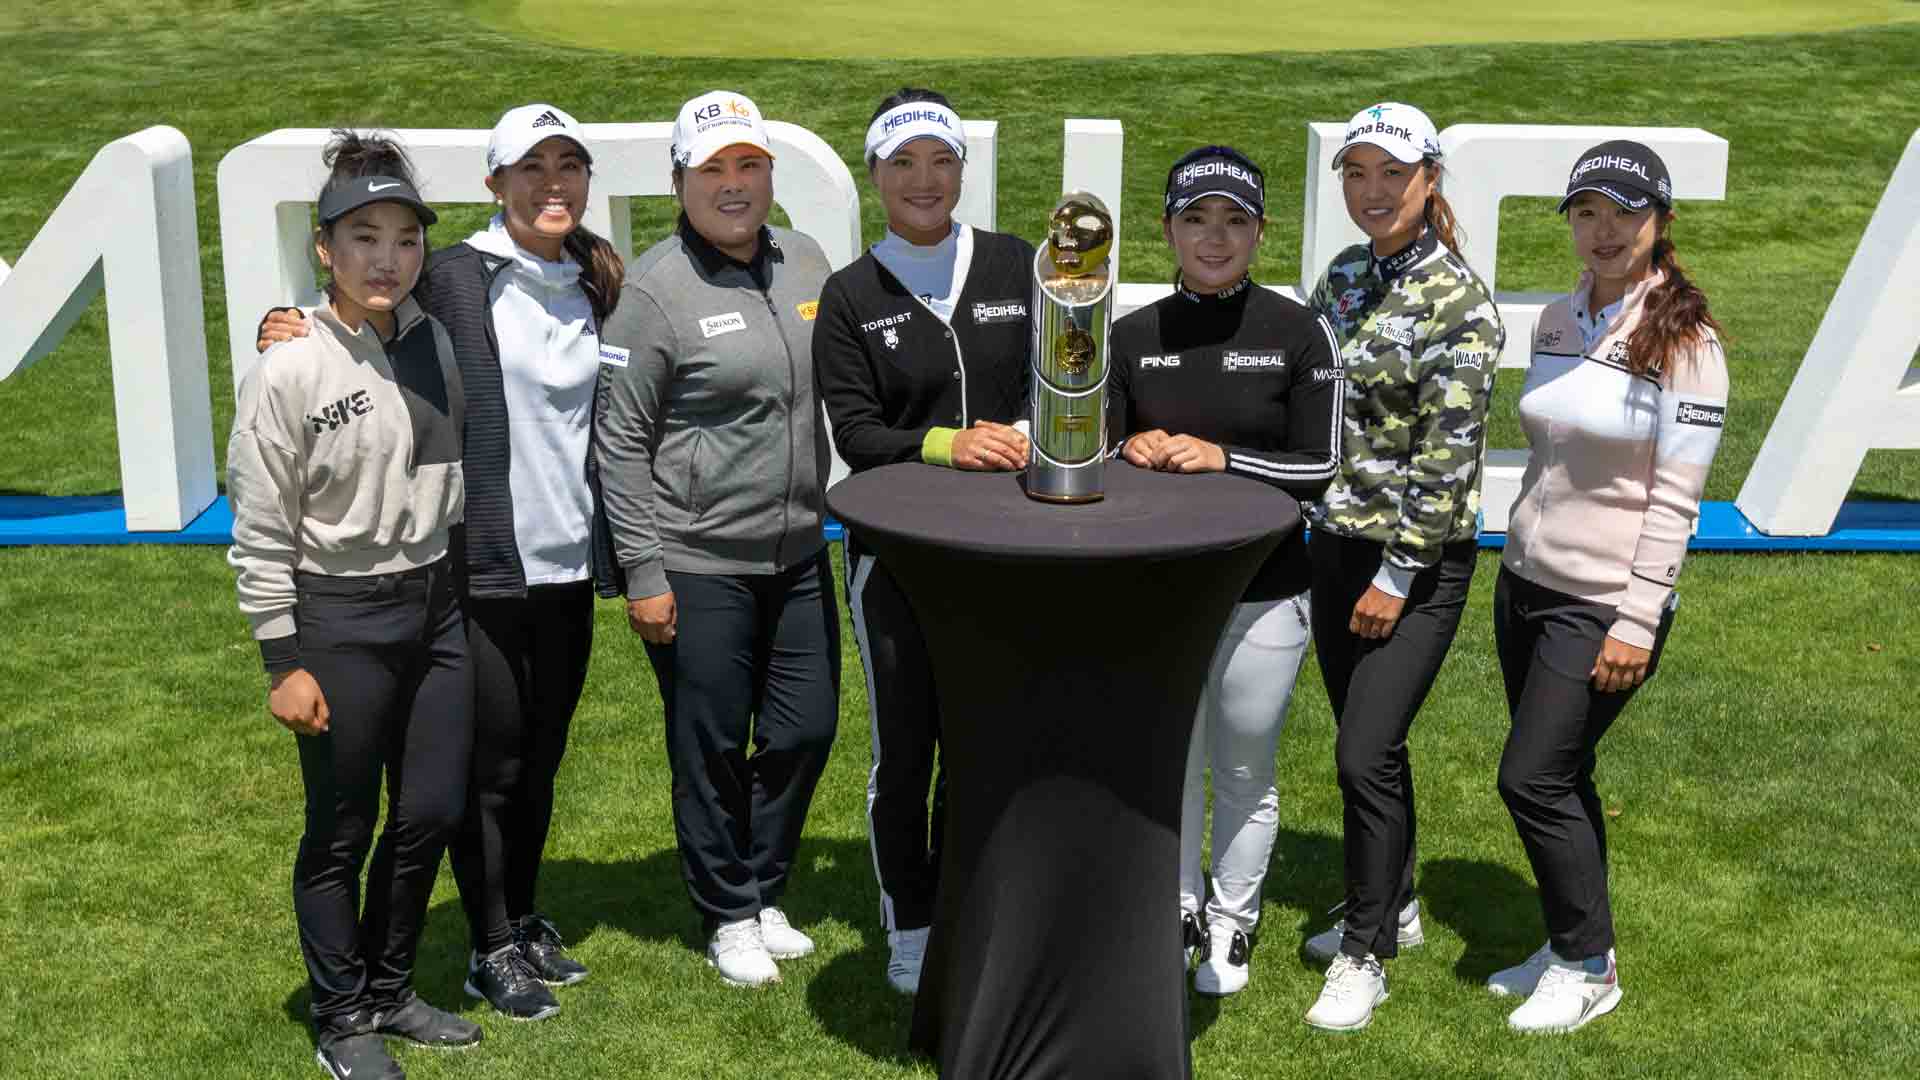 Players during a photo call ahead of the LPGA MEDIHEAL Championship.